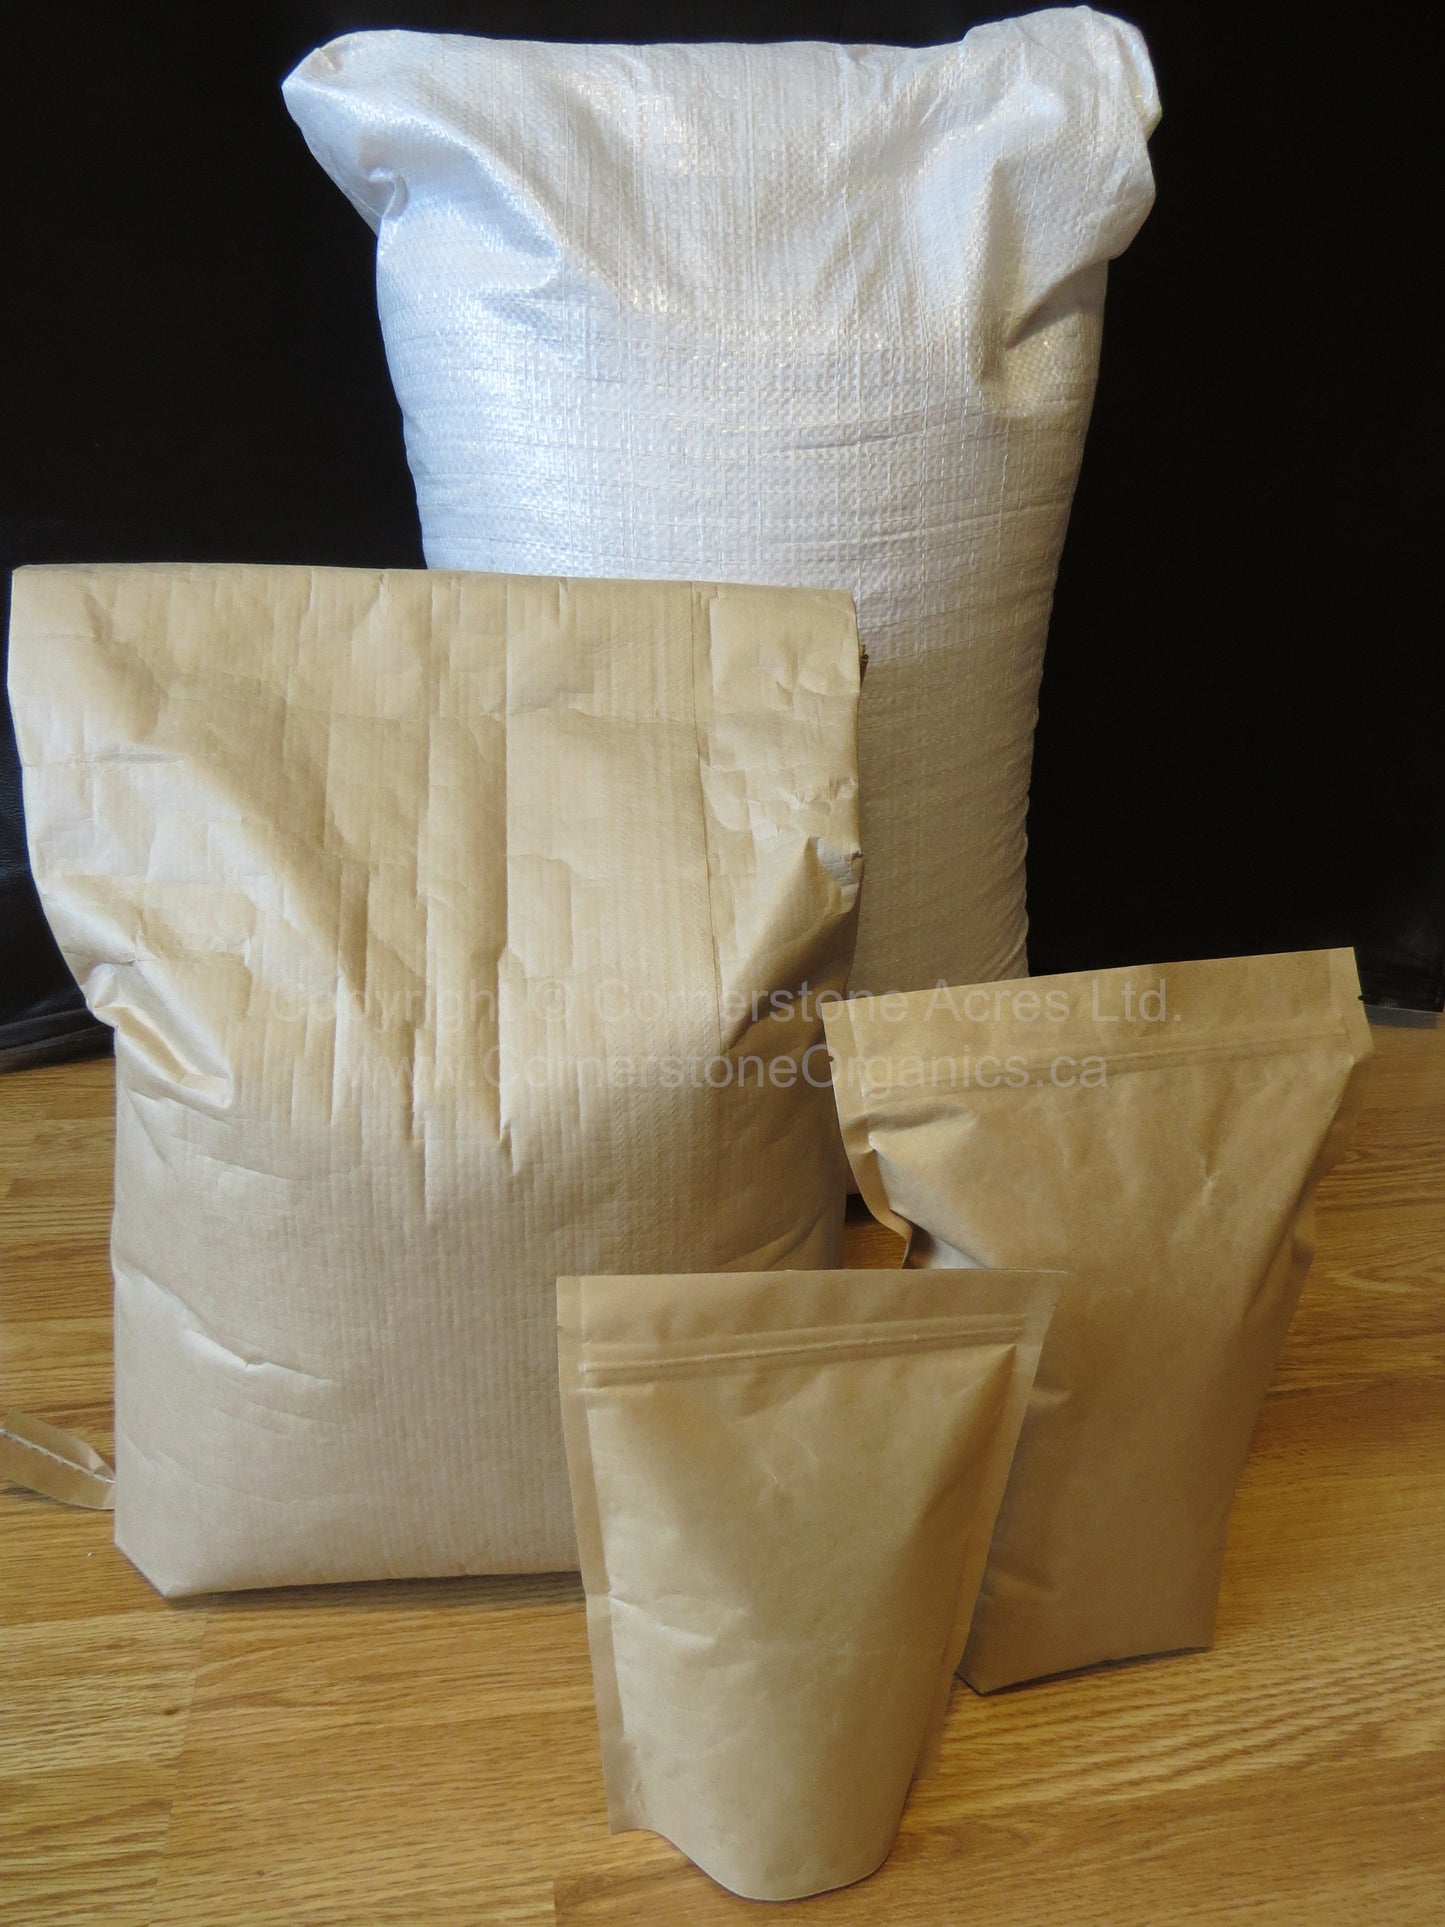 Bags of Performance / Pony Oats